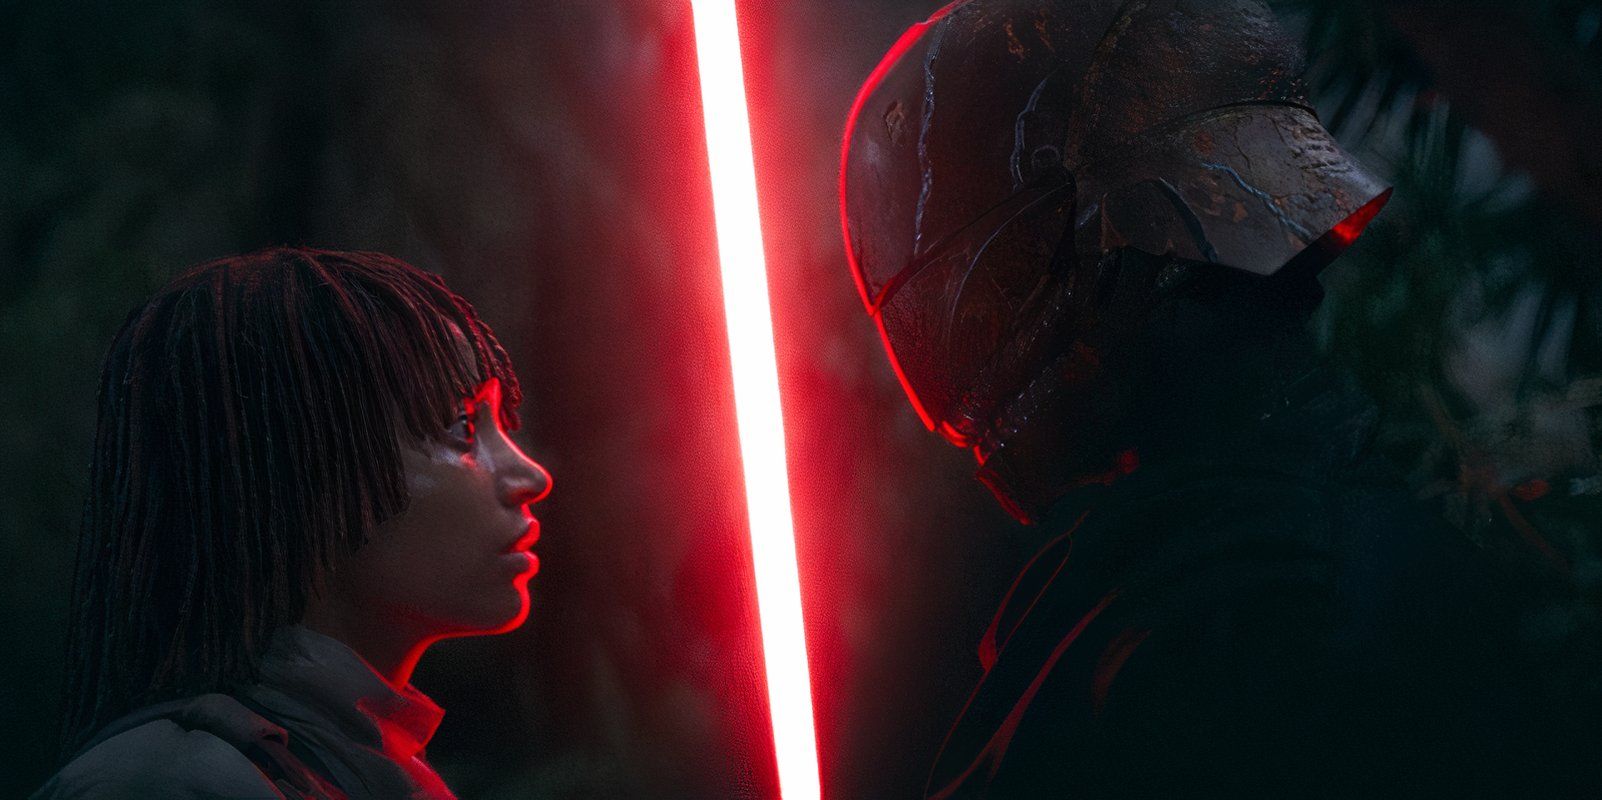 Osha Aniseya (Amandla Stenberg) looks terrified as the Sith Lord holds up their red lightsaber in front of her face in the Acolyte episode 4